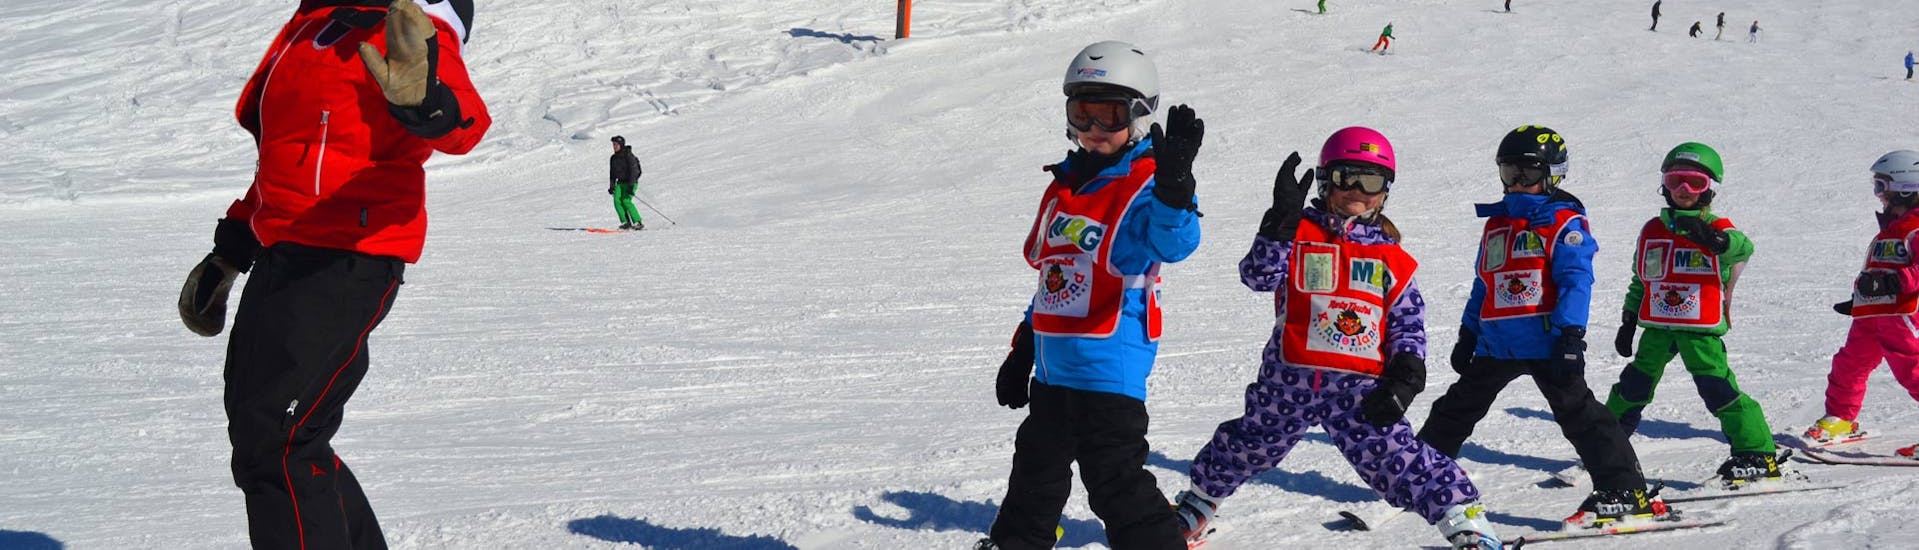 Kids Ski Lessons (from 3-13 y.) for Beginners - Half Day.